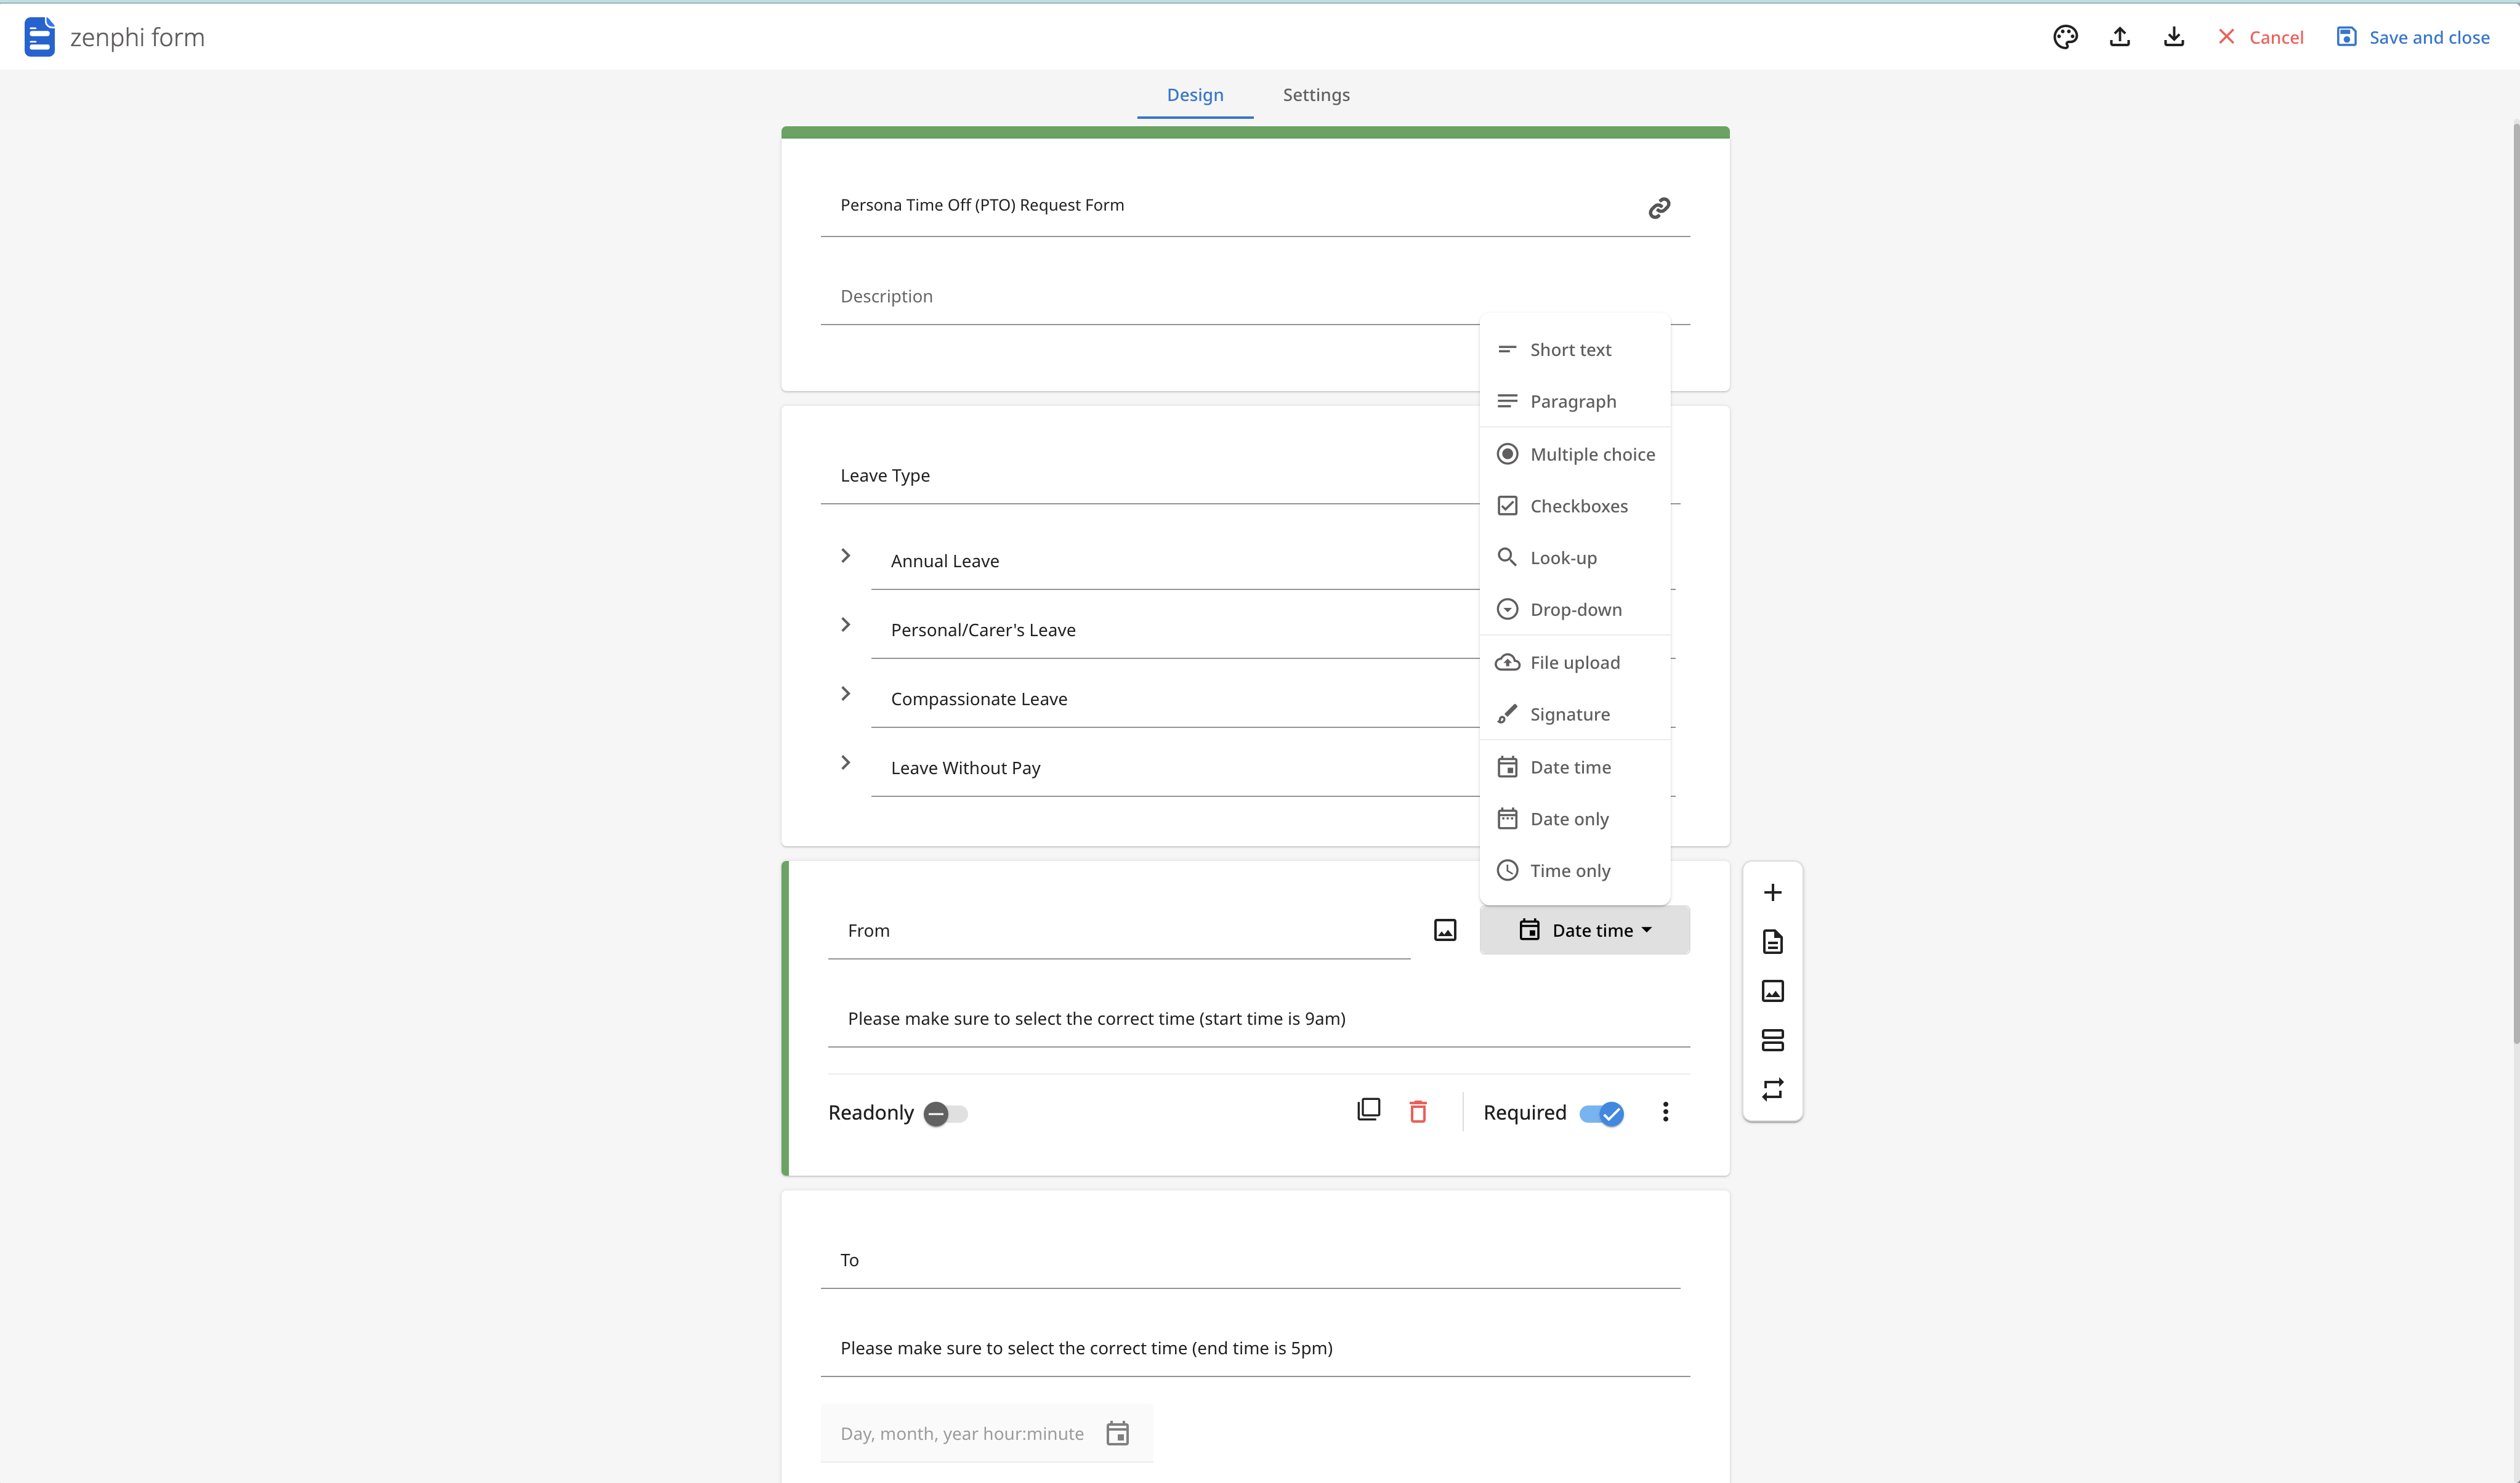 Build & customize forms within zenphi. Zenphi Forms provide a powerful alternative to Google Forms for your data capture requirements. However, with seamless integration to Google Forms, Typeform and other applications, you're in control of every step.